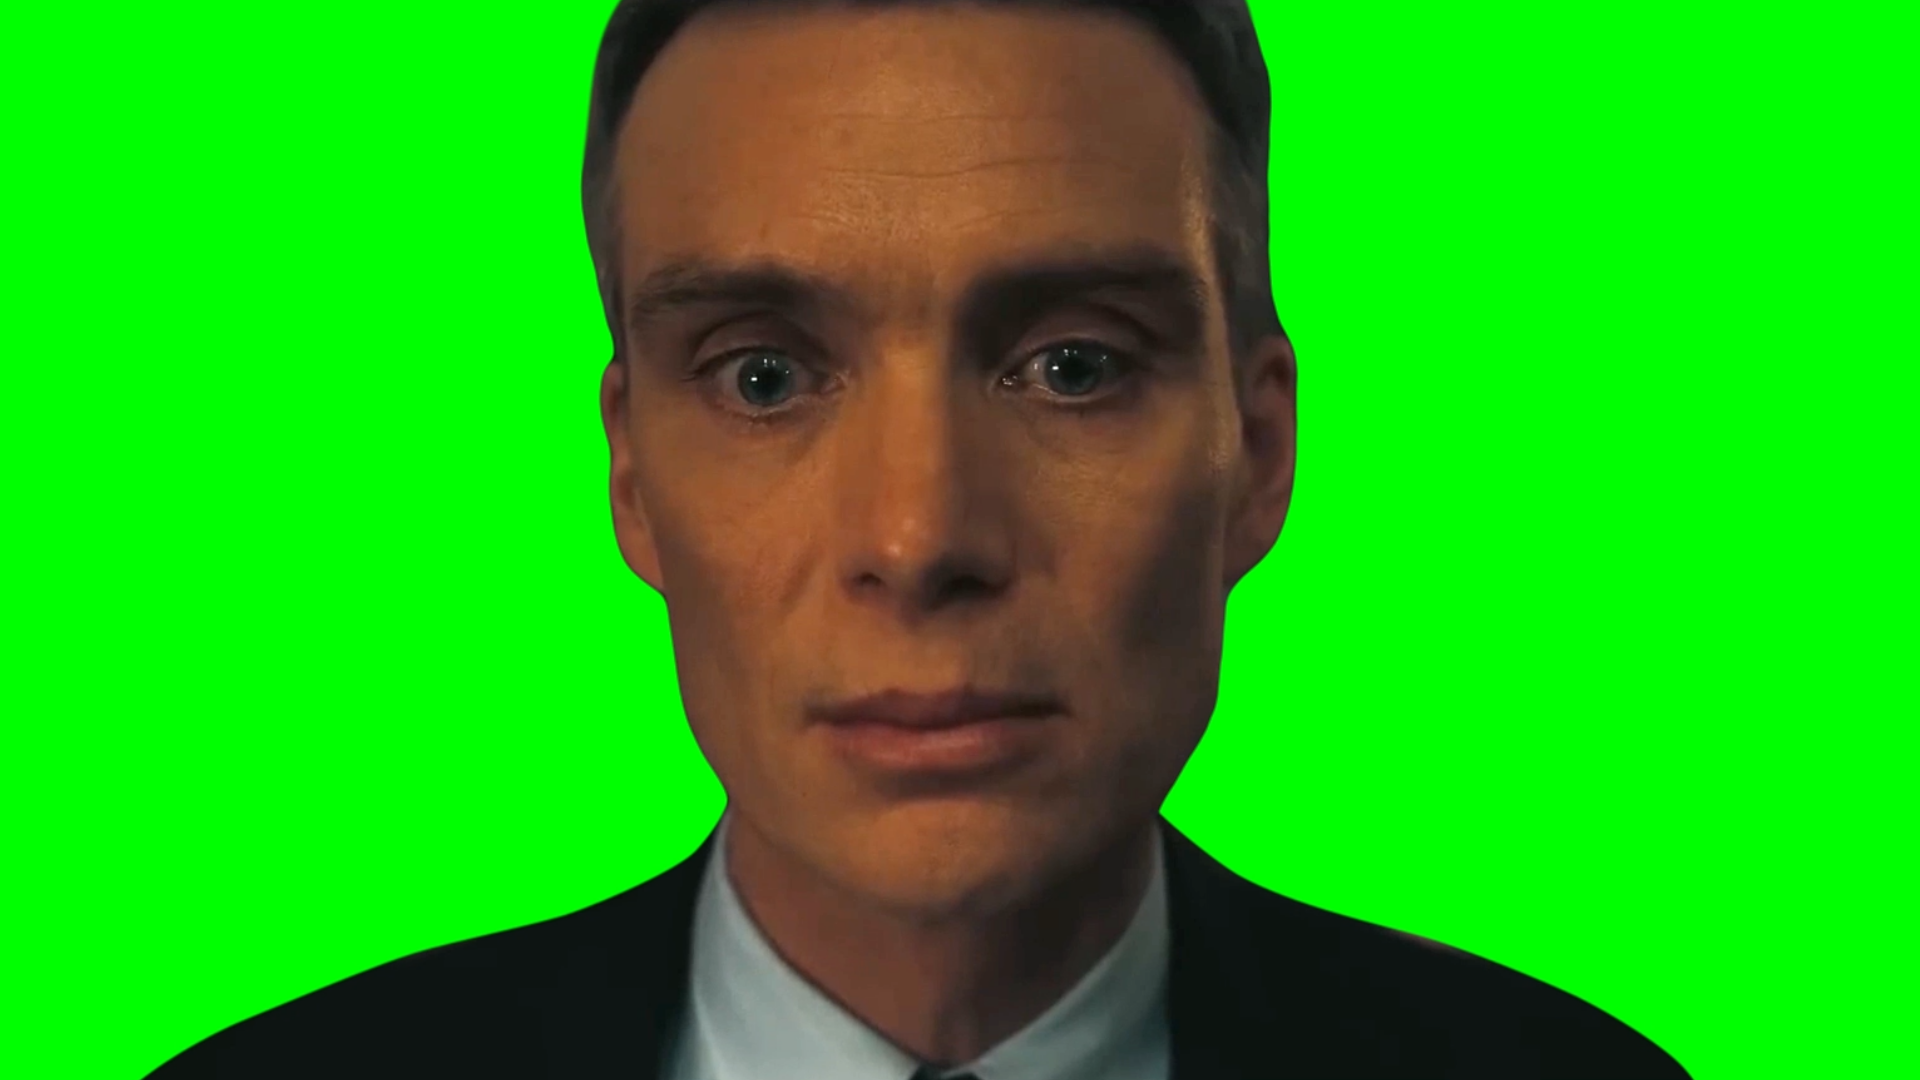 Oppenheimer shocked and stressed out staring meme (Green Screen)